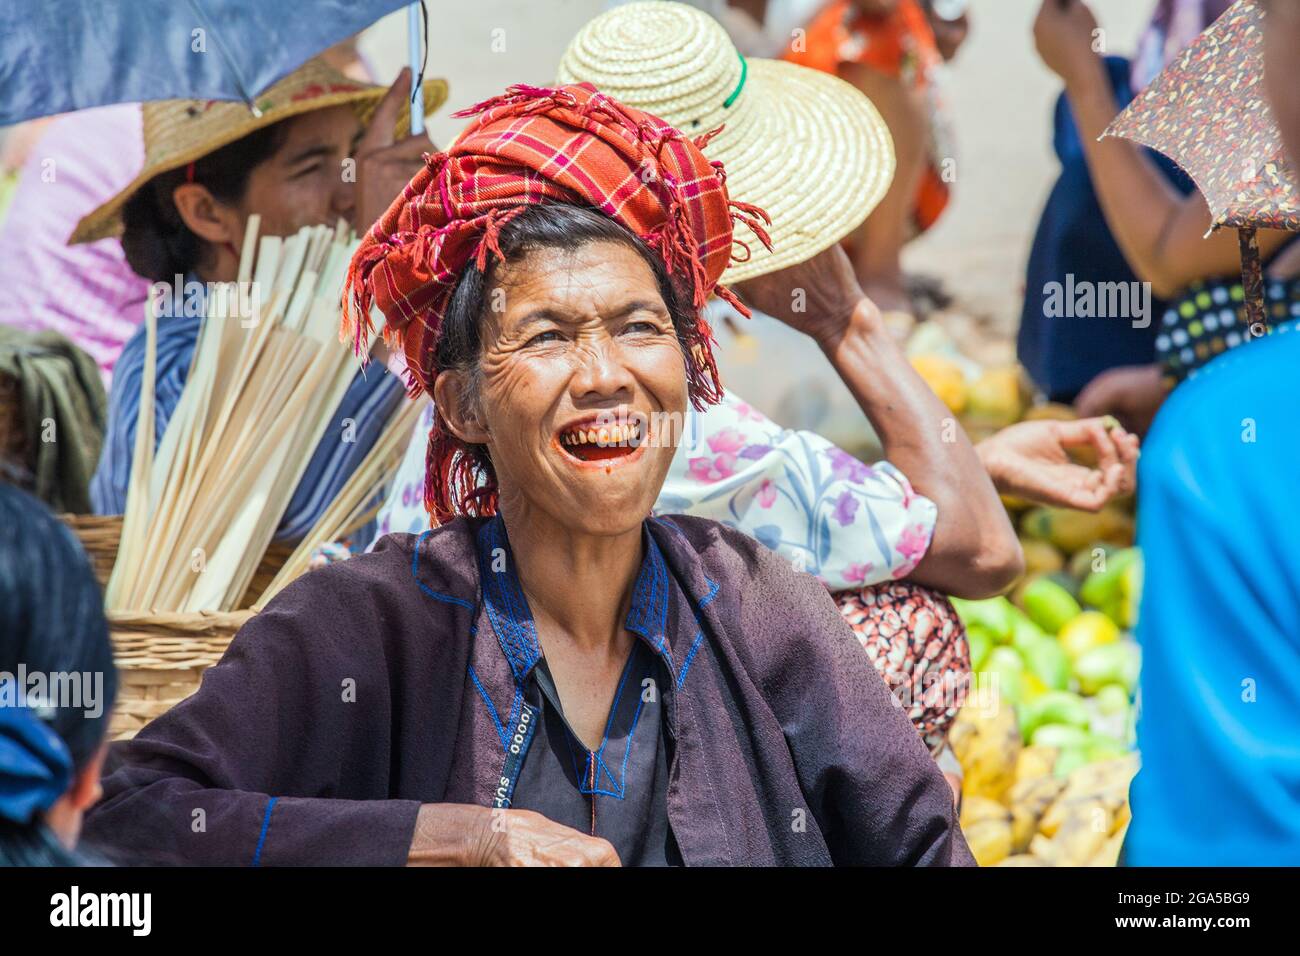 Female from Pa'o (Pa-o) ethnic hill tribe wearing red turban with betel nut stains on teeth in Kalaw, Shan State, Myanmar Stock Photo